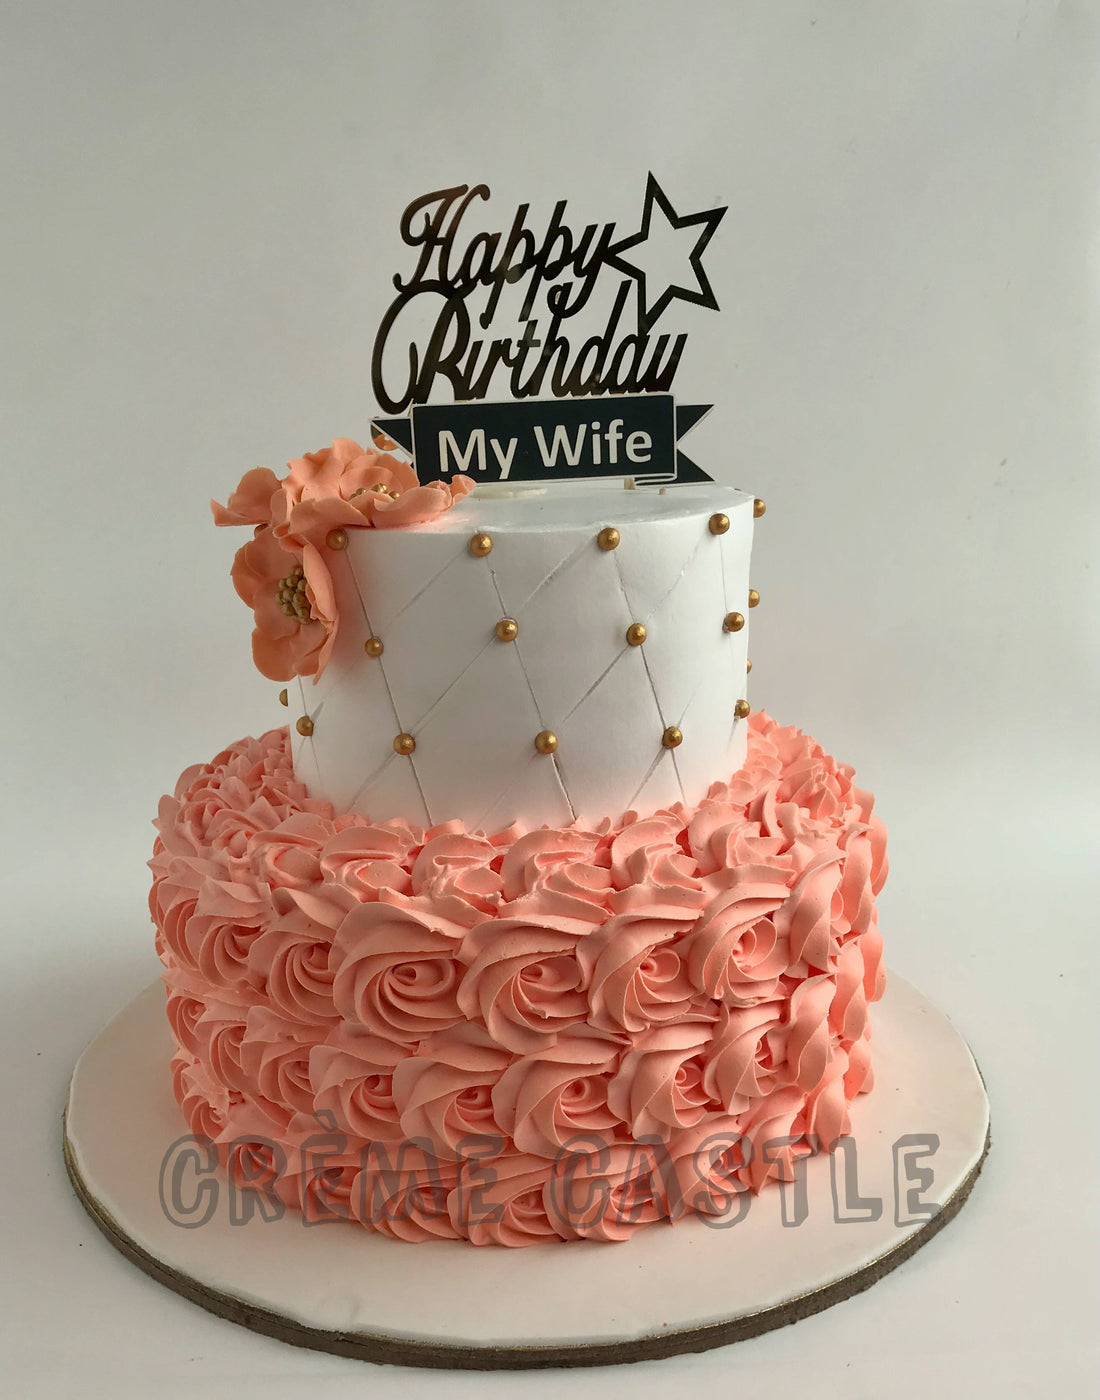 1st birthday Cake for Girl in Peach by Creme Castle